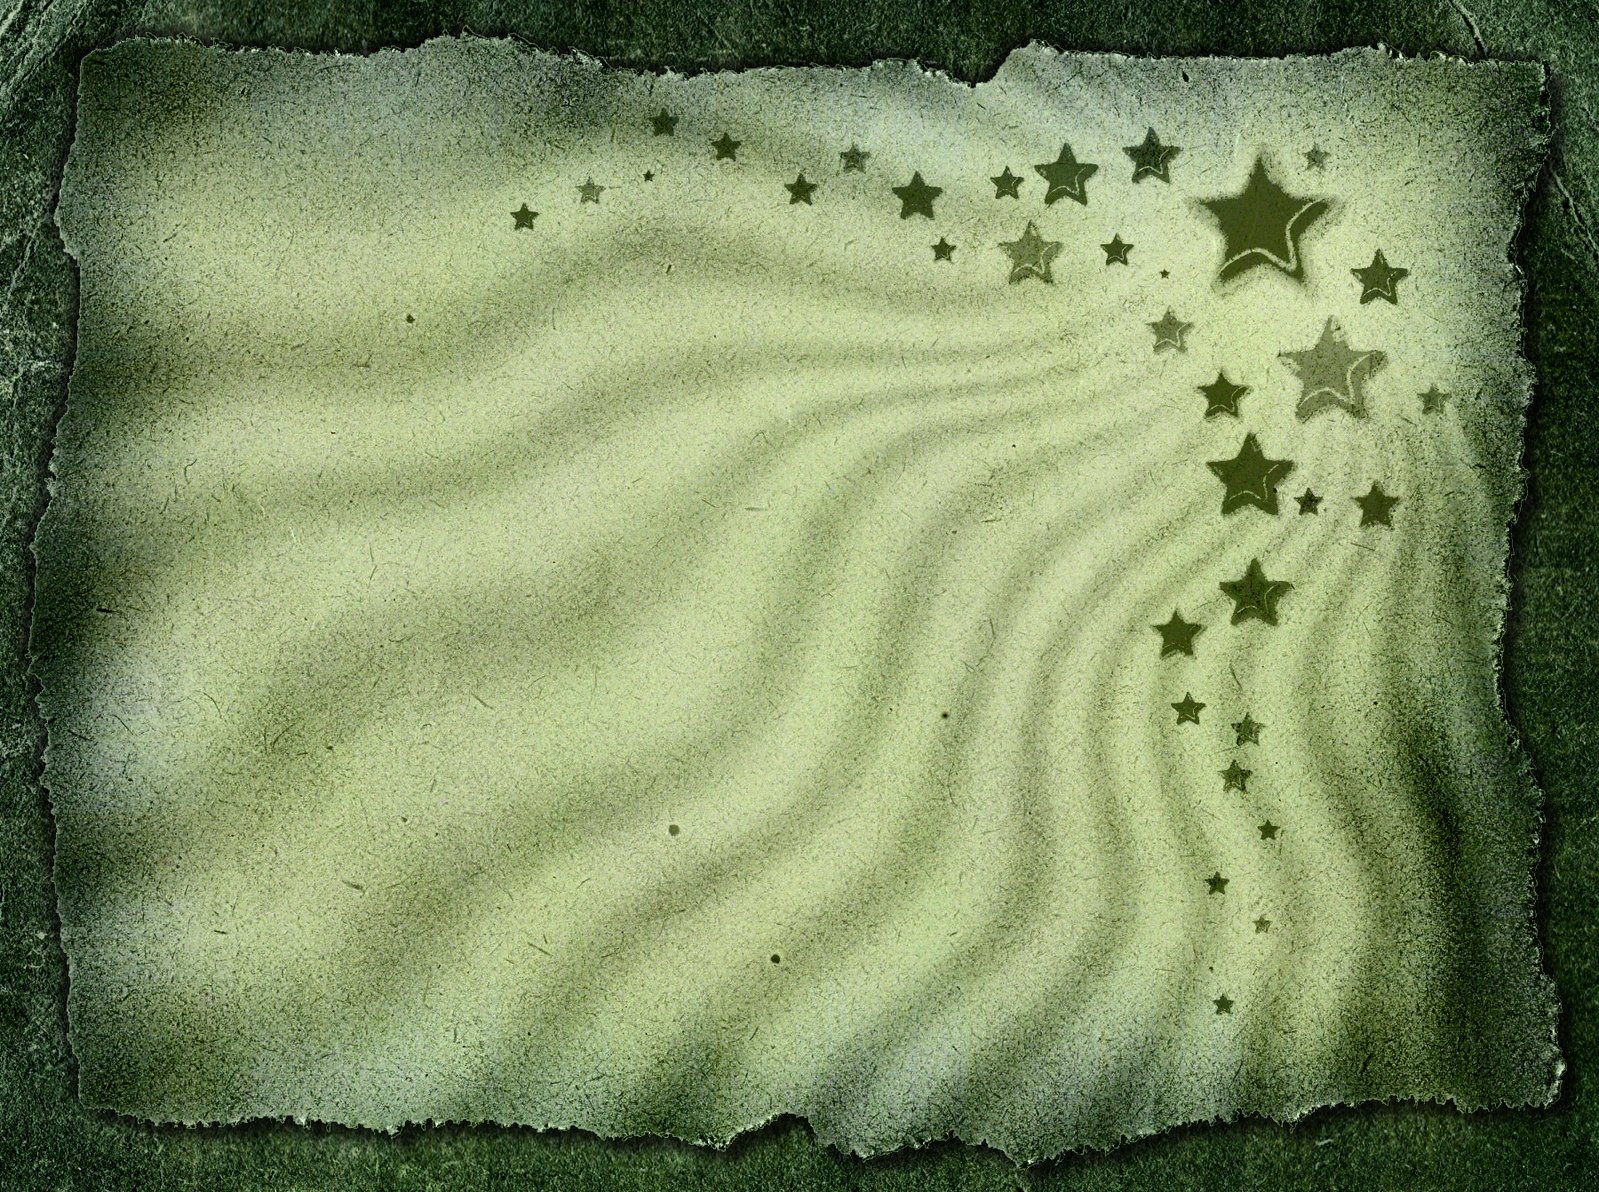 green picture with stars on white background